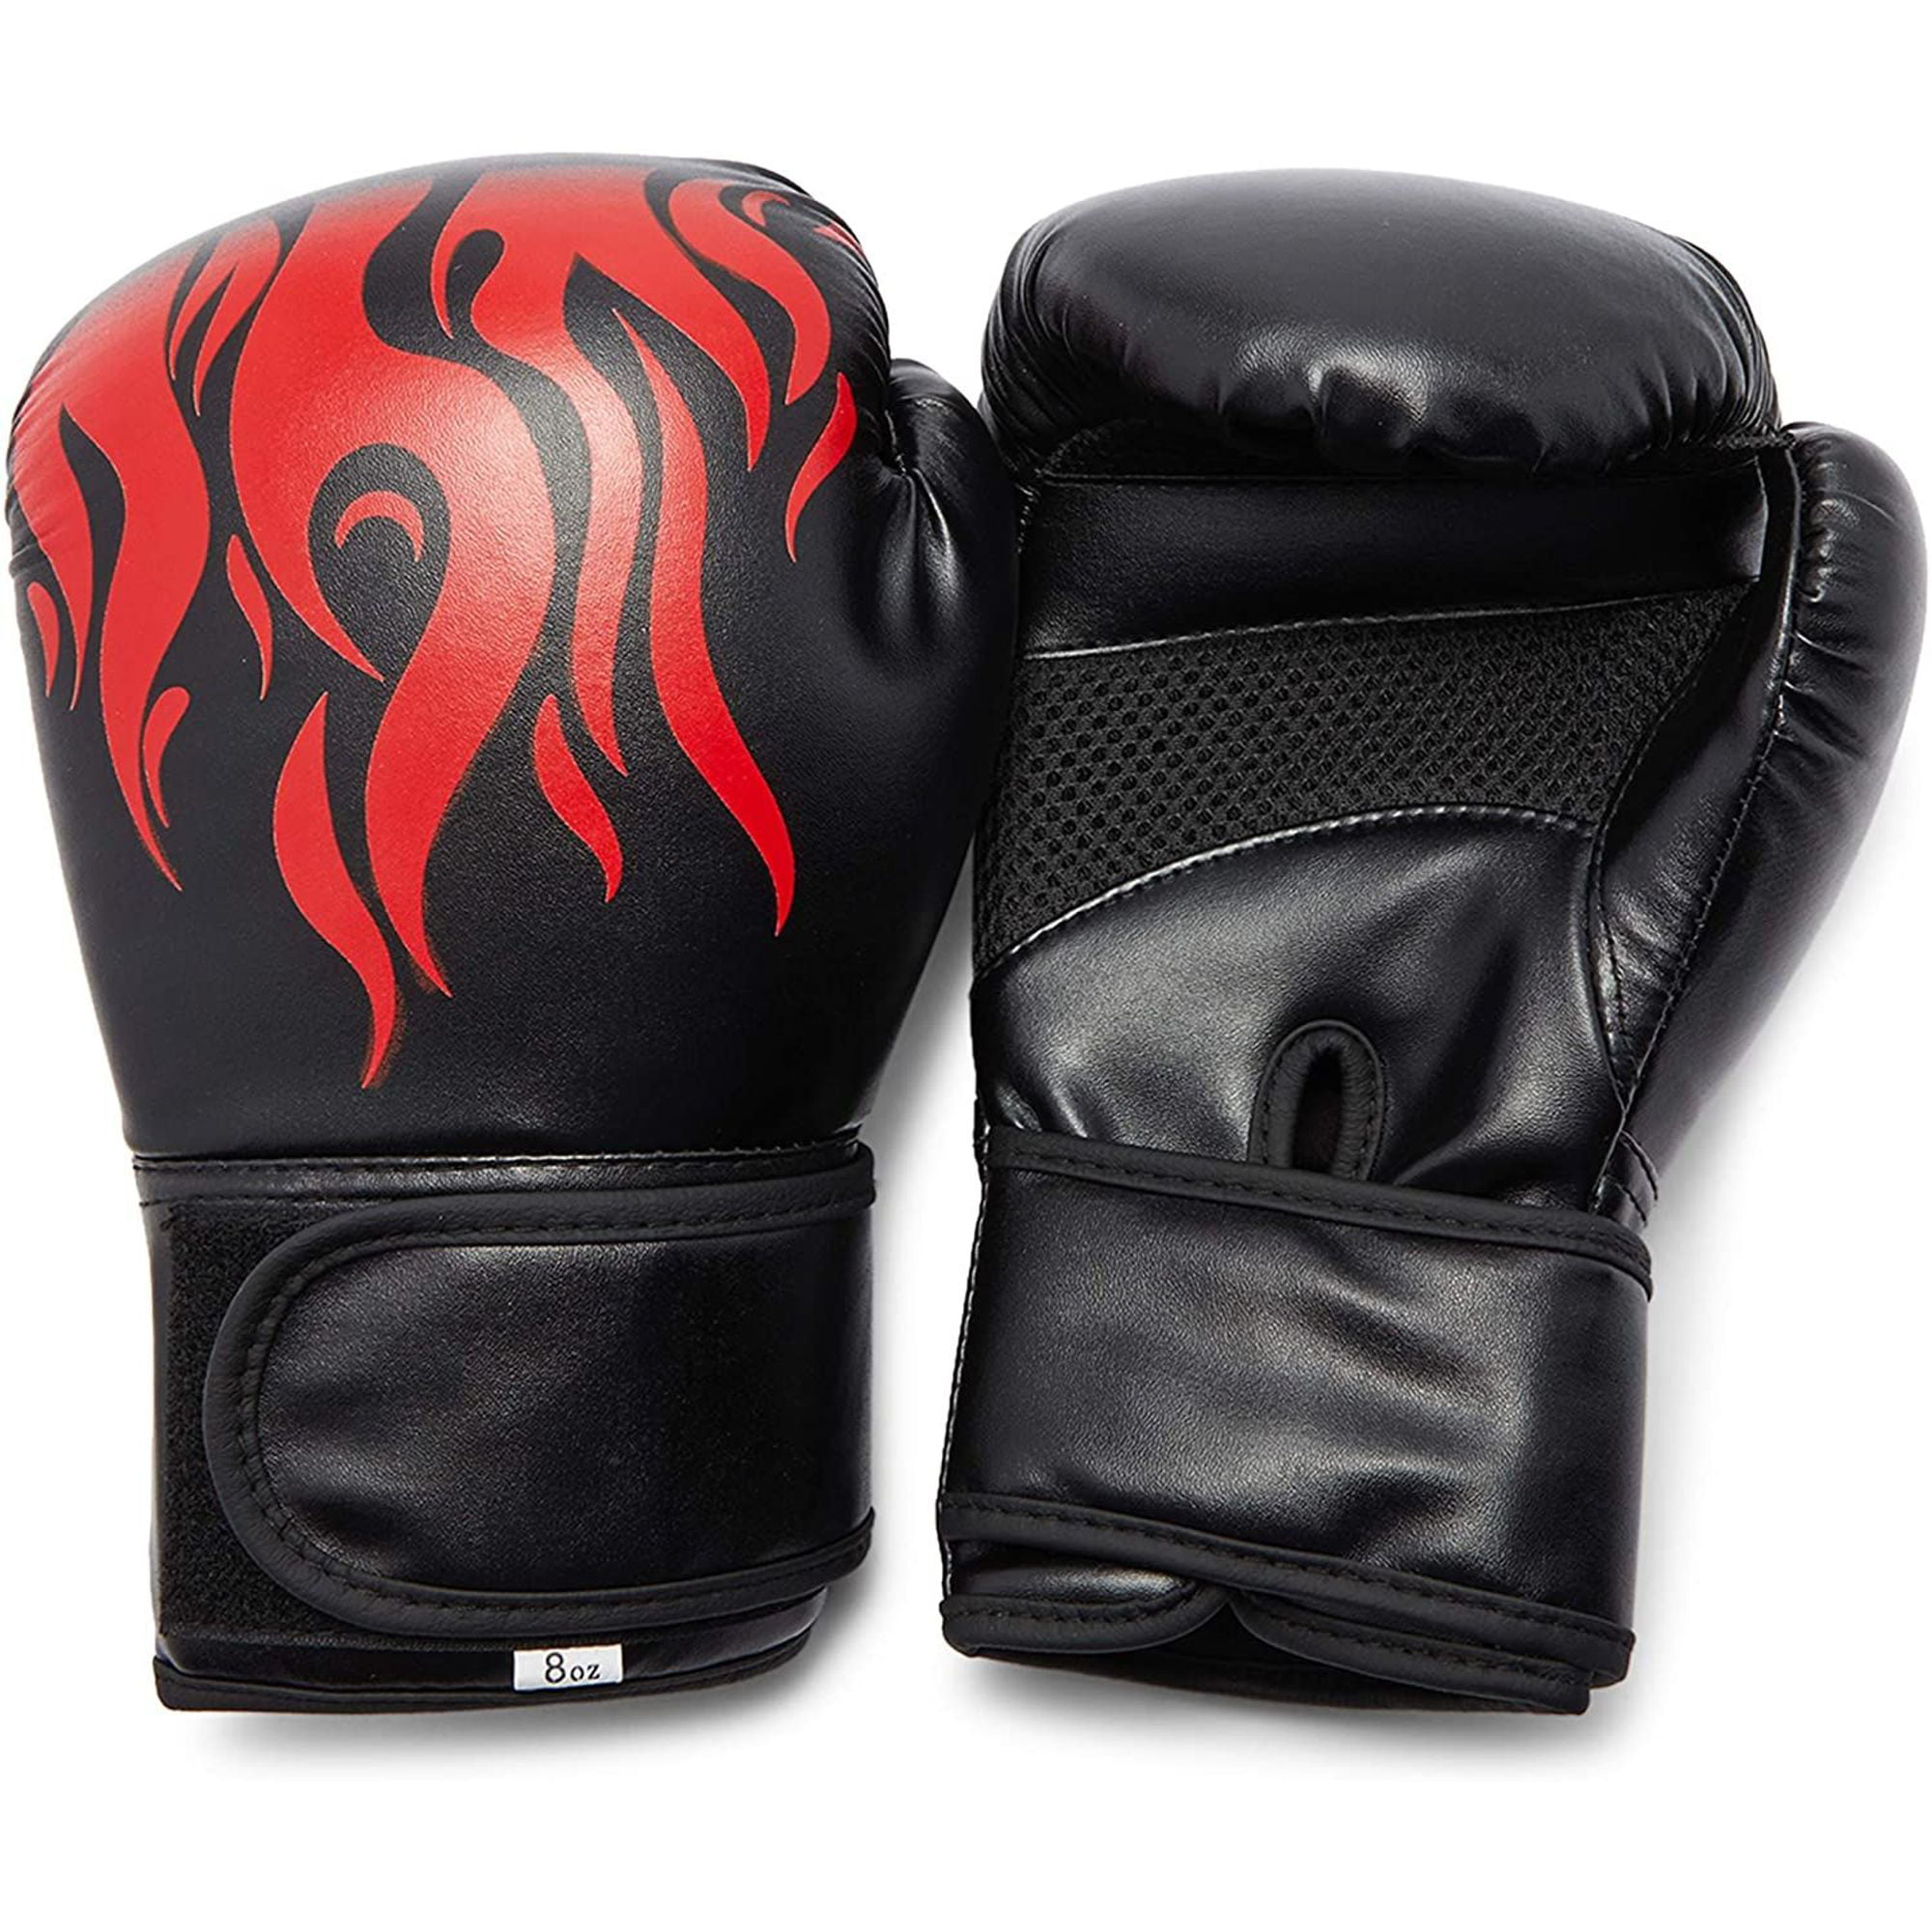 ROYAL FIGHT GEAR Details about   MMA GLOVES REAL LEATHER MIXED MARTIAL ARTS S,M,L,XL sizes 